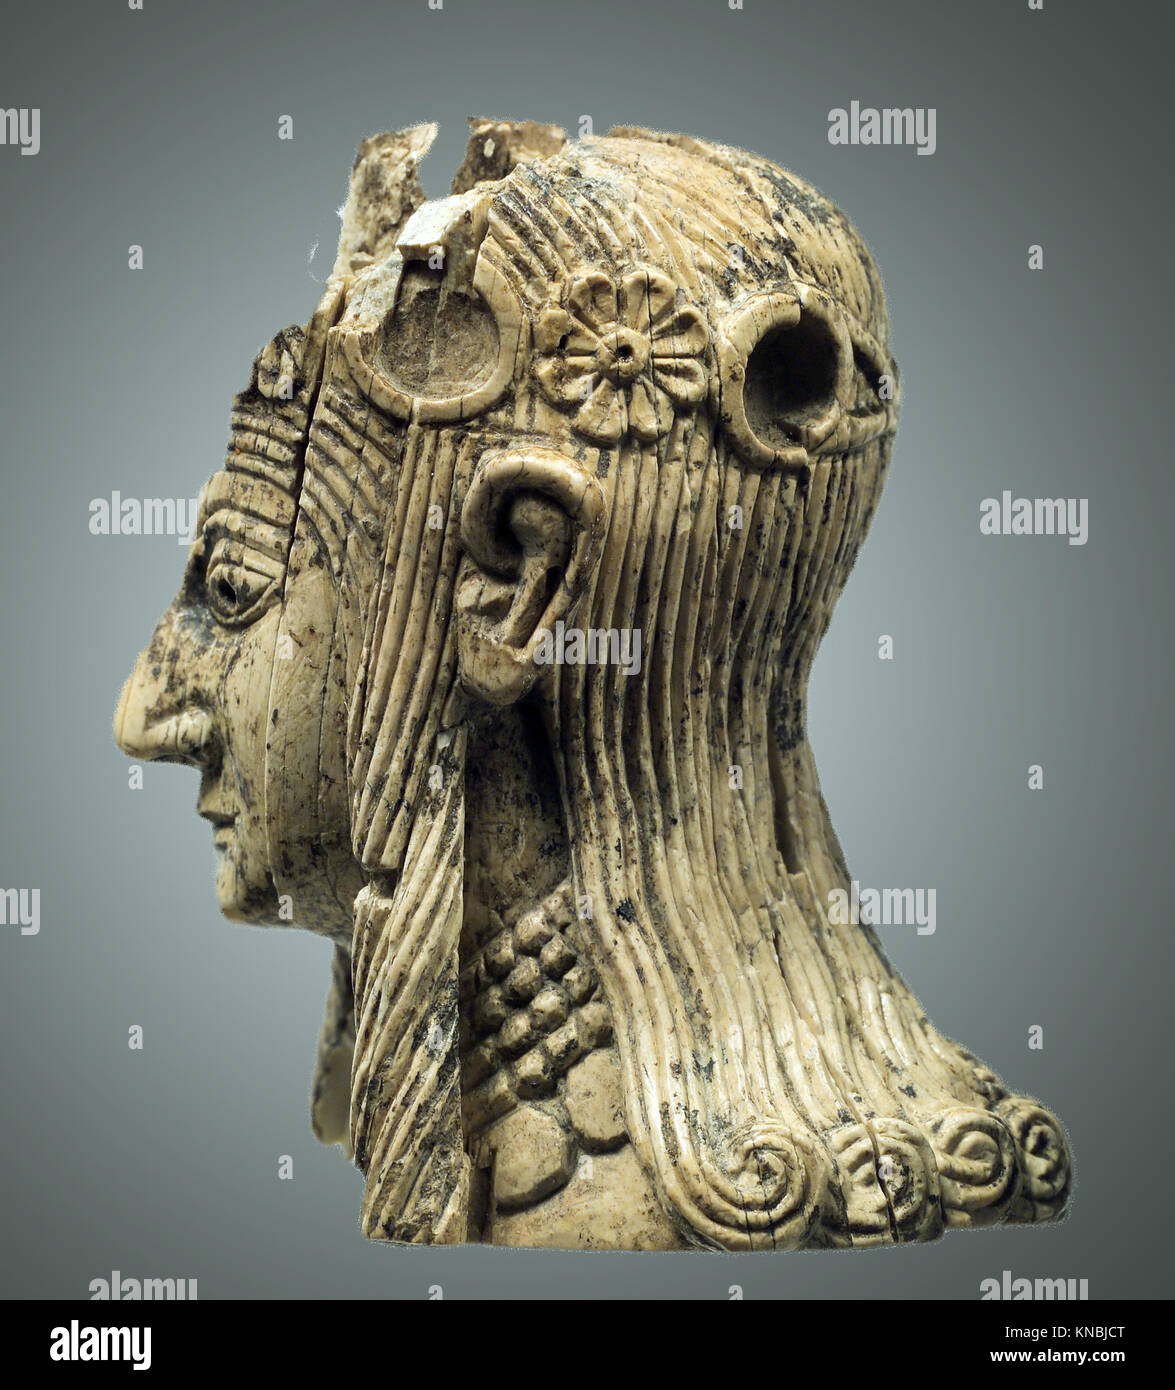 6200. STONE MASK PERHAPS USED IN CULTIC CEREMONIES, NEOLITHIC' PERIOD,  7TH. MILLENNIUM B.C. found in the Judean Hills. Stock Photo